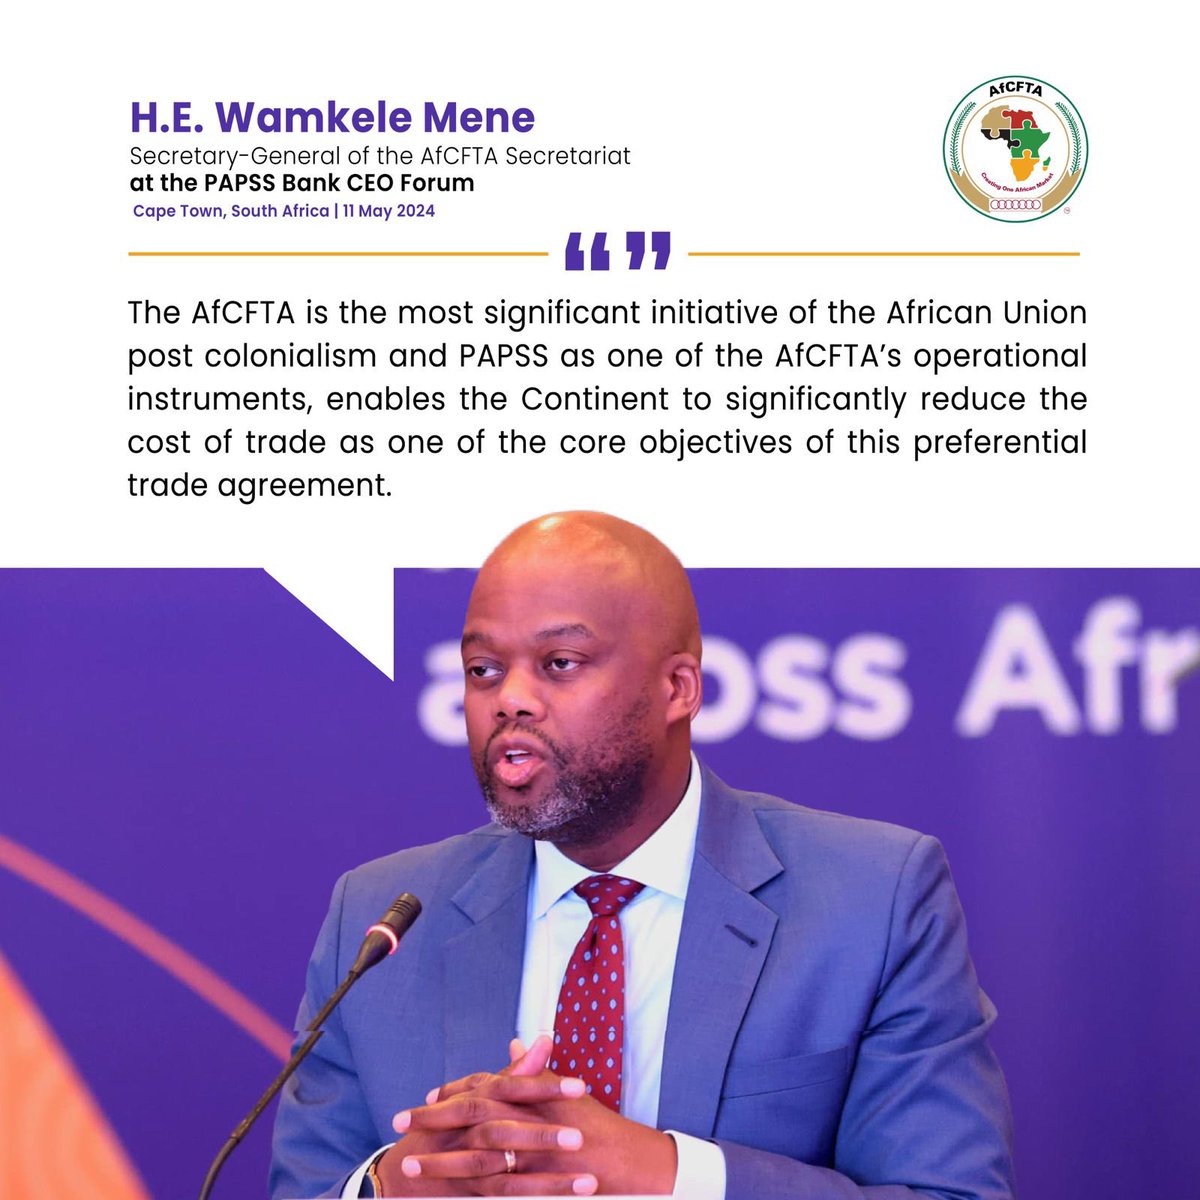 H.E. @MeneWamkele addressing the audience at the 1st #PAPSS Bank CEO Forum today in #CapeTown #SouthAfrica 

@papss_africa 
#DigitalTrade #OneAfricanMarket #AfCFTA #Africa #Payments